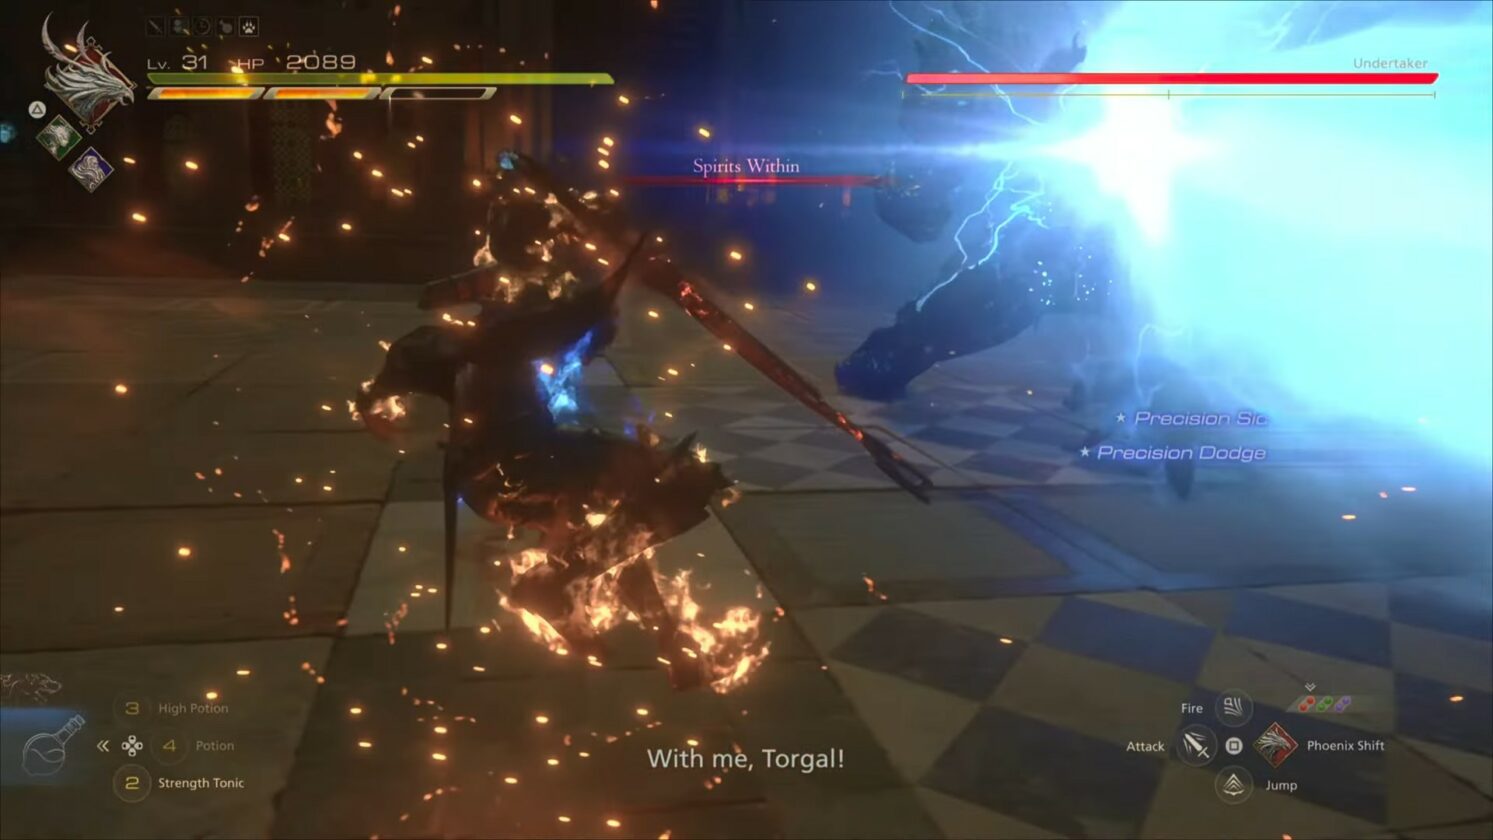 Undertaker Spirits Within in FF16